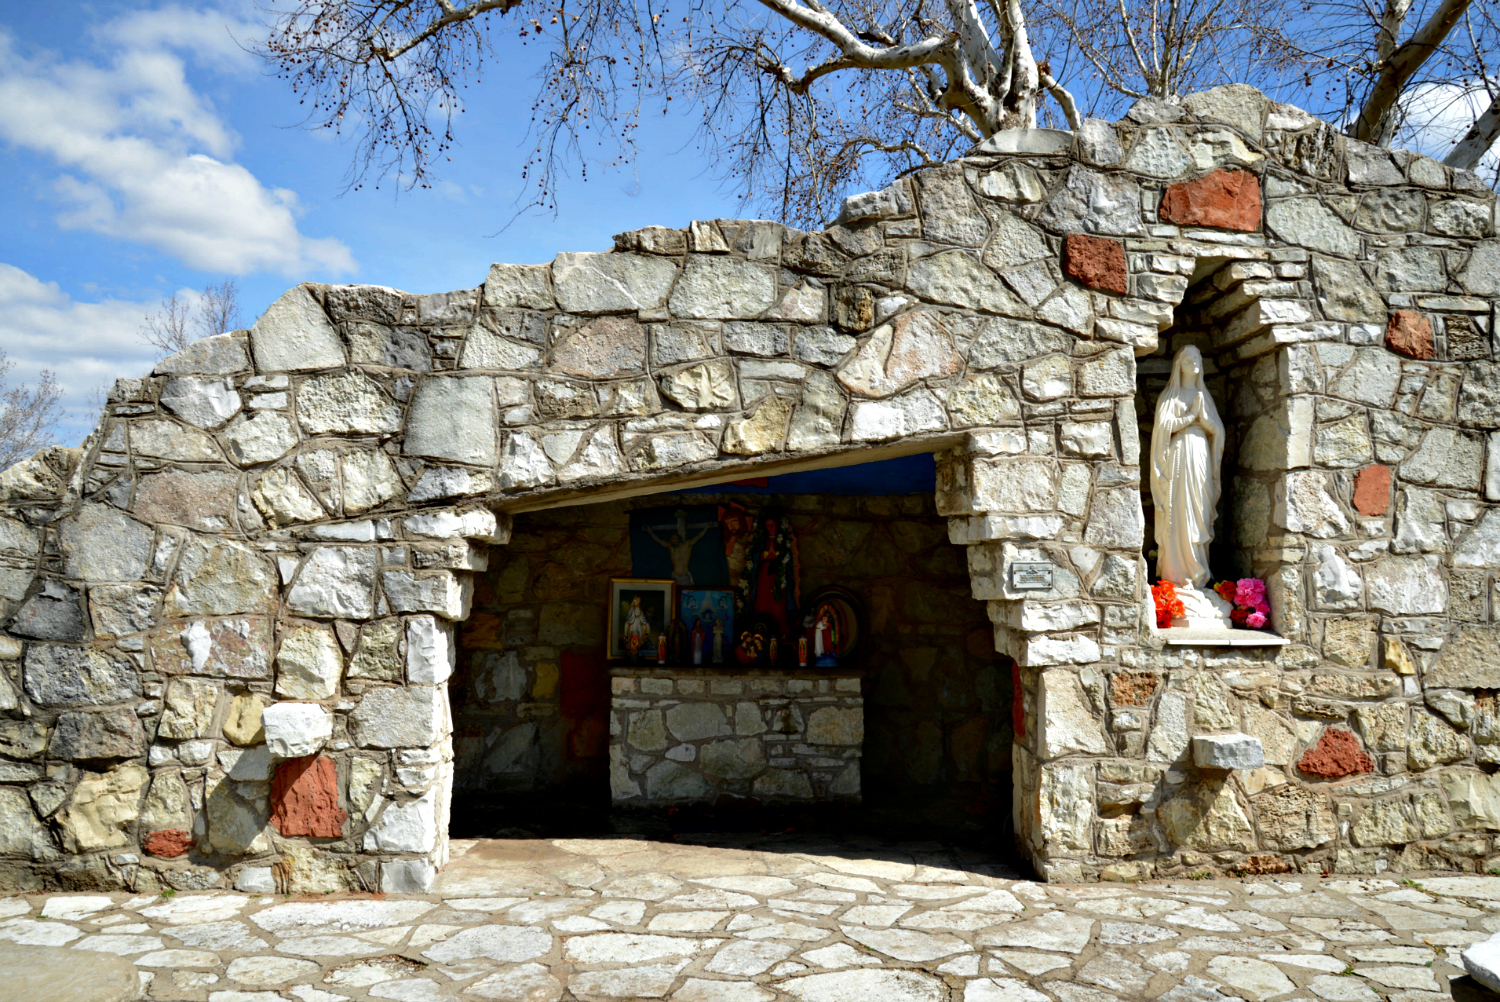 grotto with religious icons